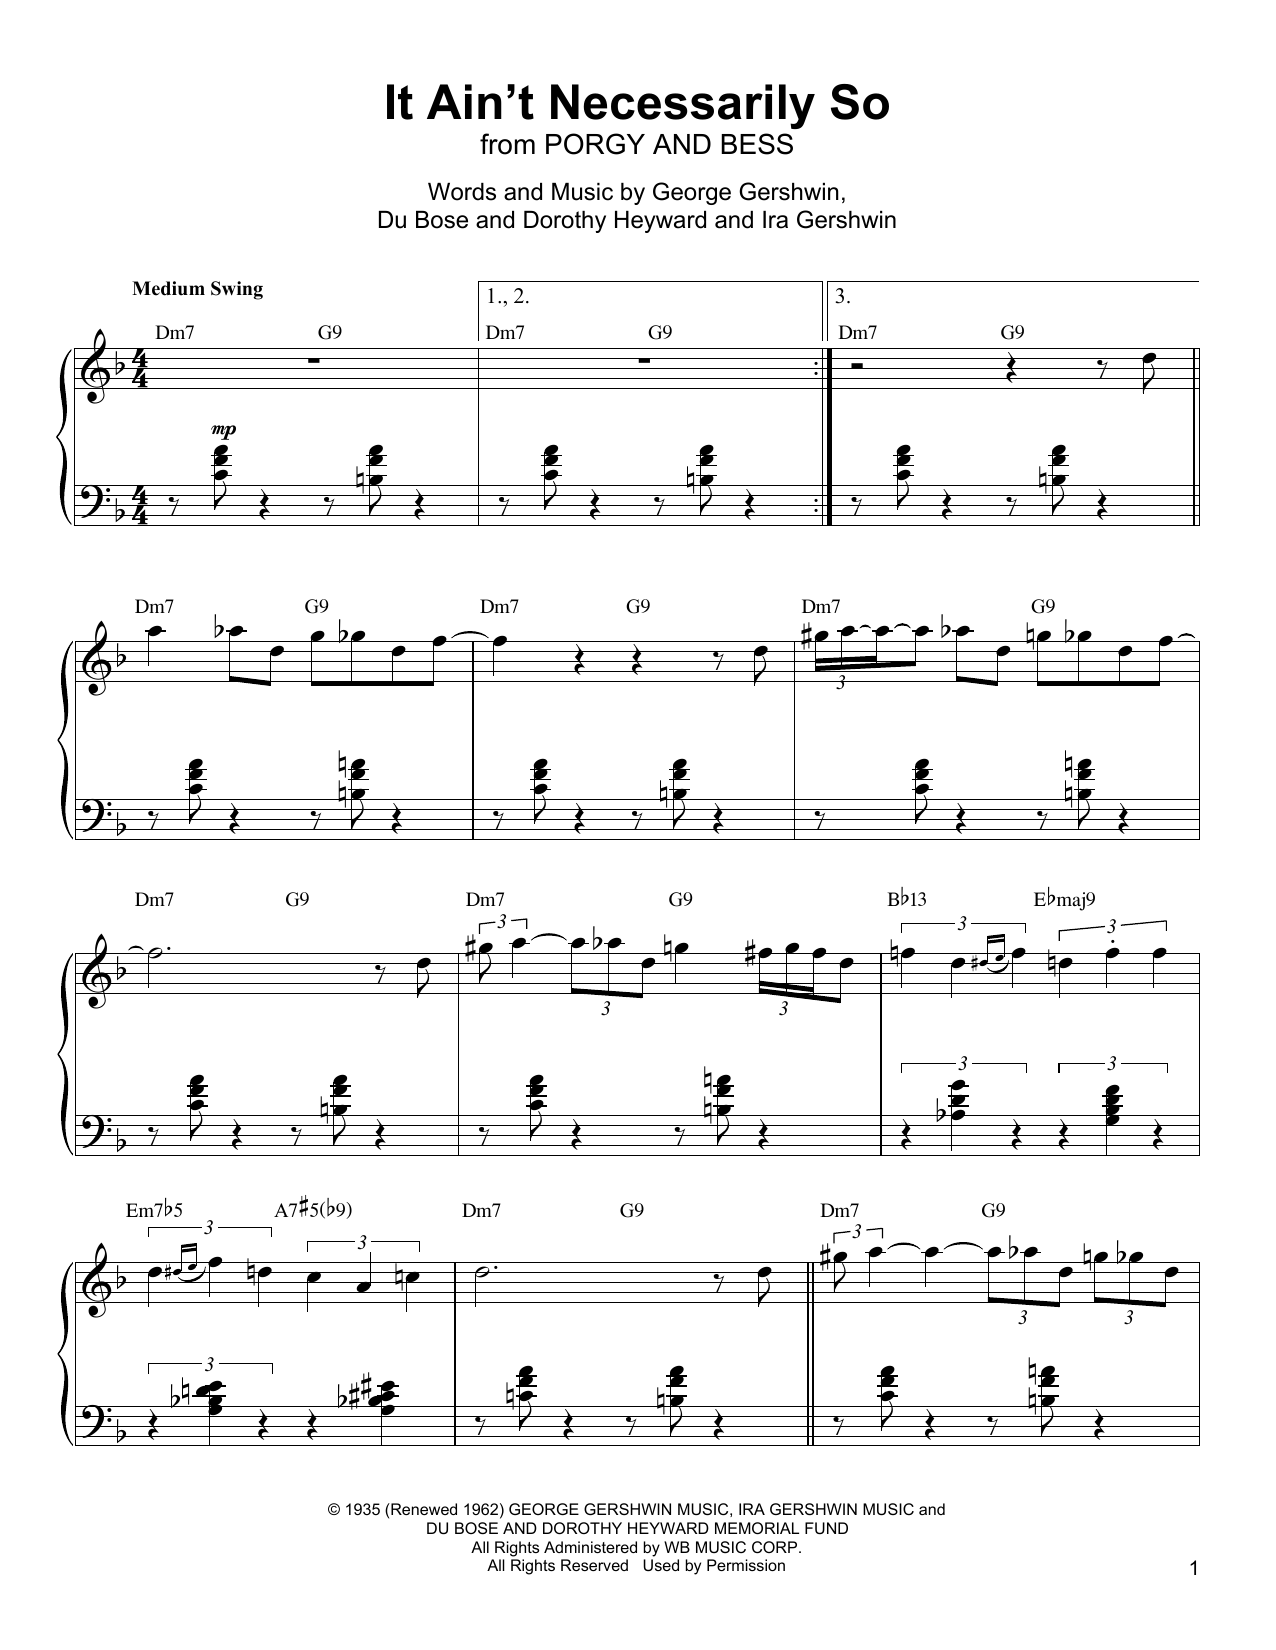 Oscar Peterson 'It Ain't Necessarily So' Sheet Music Notes, Chords...